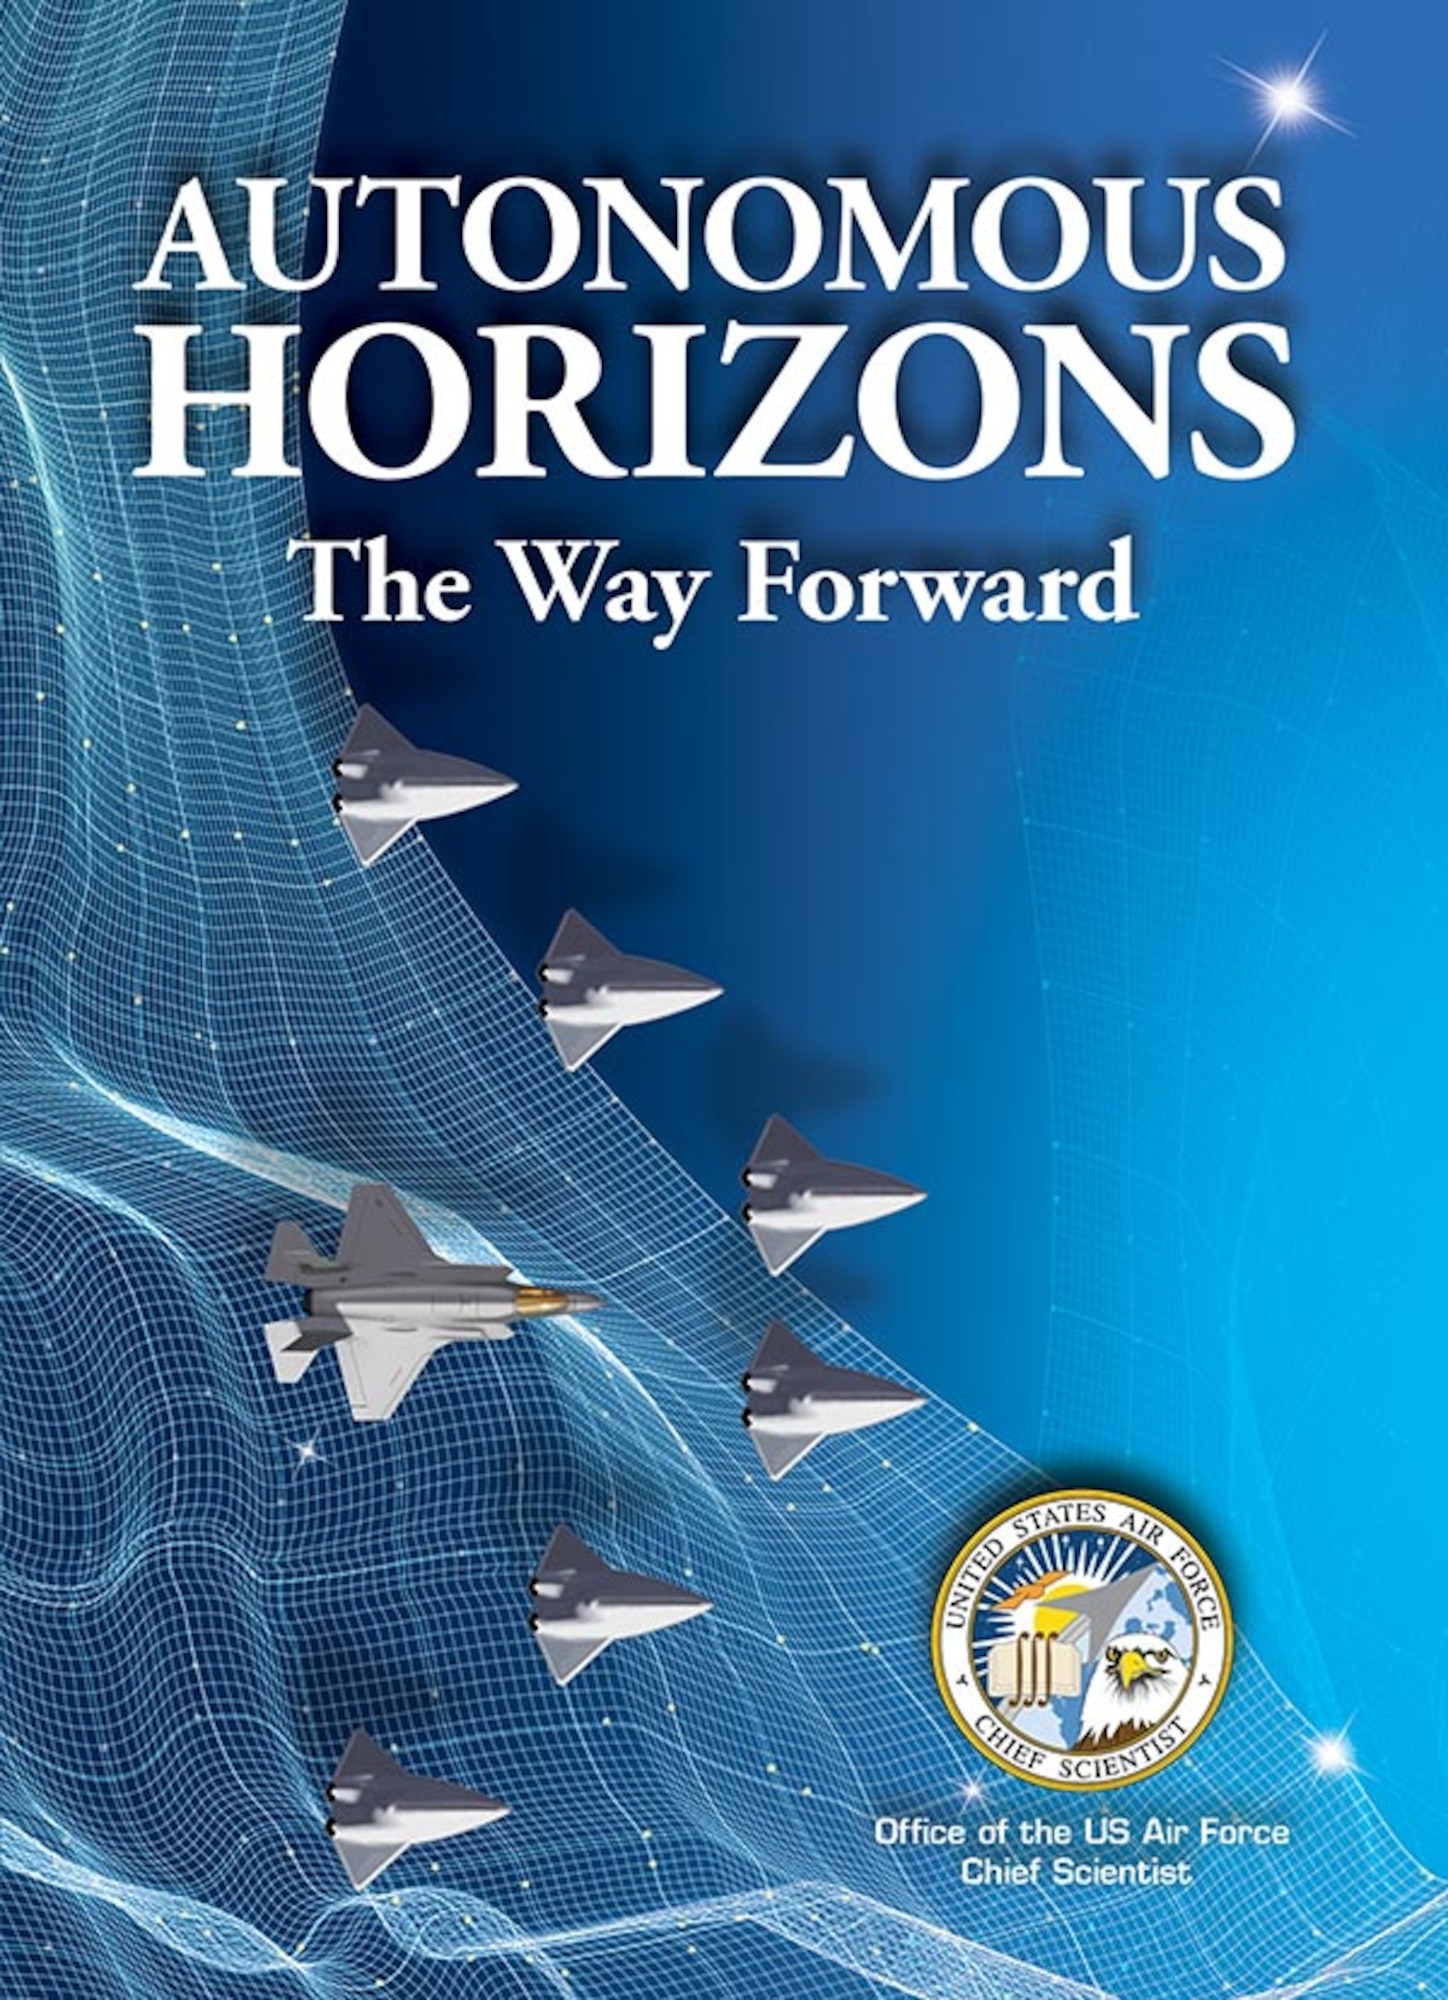 Air University Press announces the release of Autonomous Horizons: The Way Forward, by Dr. Greg Zacharias, former chief scientist of the Air Force. Autonomous Horizons: The Way Forward identifies issues and makes recommendations for the Air Force to take full advantage of this transformational technology. Download it at http://www.airuniversity.af.mil/AUPress/. (Courtesy Photo)